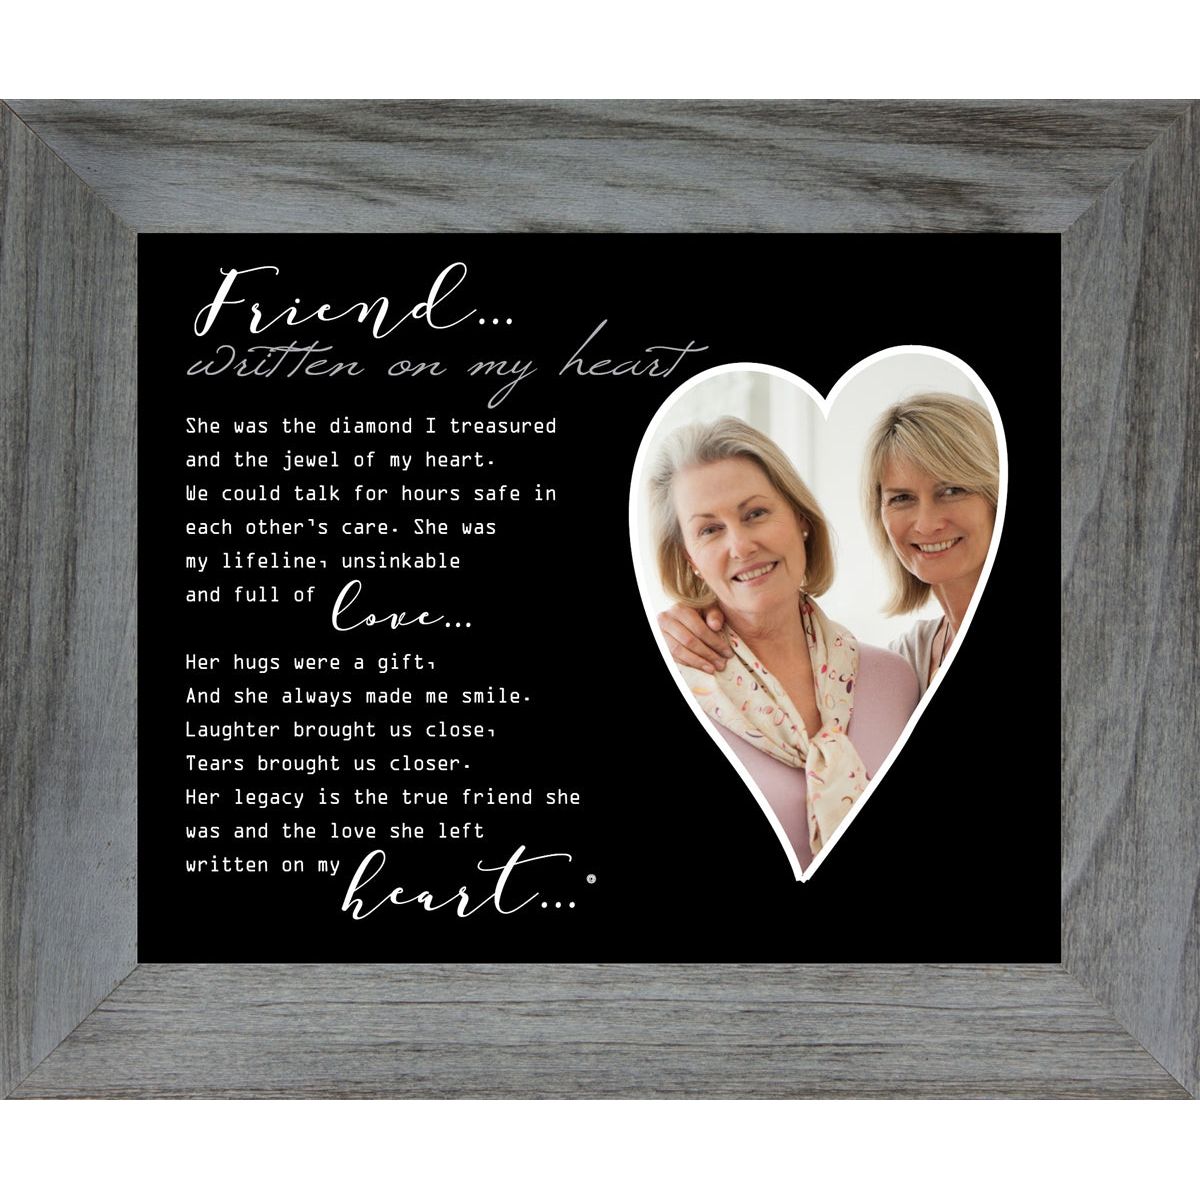 8x10 Distressed Gray wood frame with "Friend... Written on My Heart" poem and an heart shaped opening for a photograph.